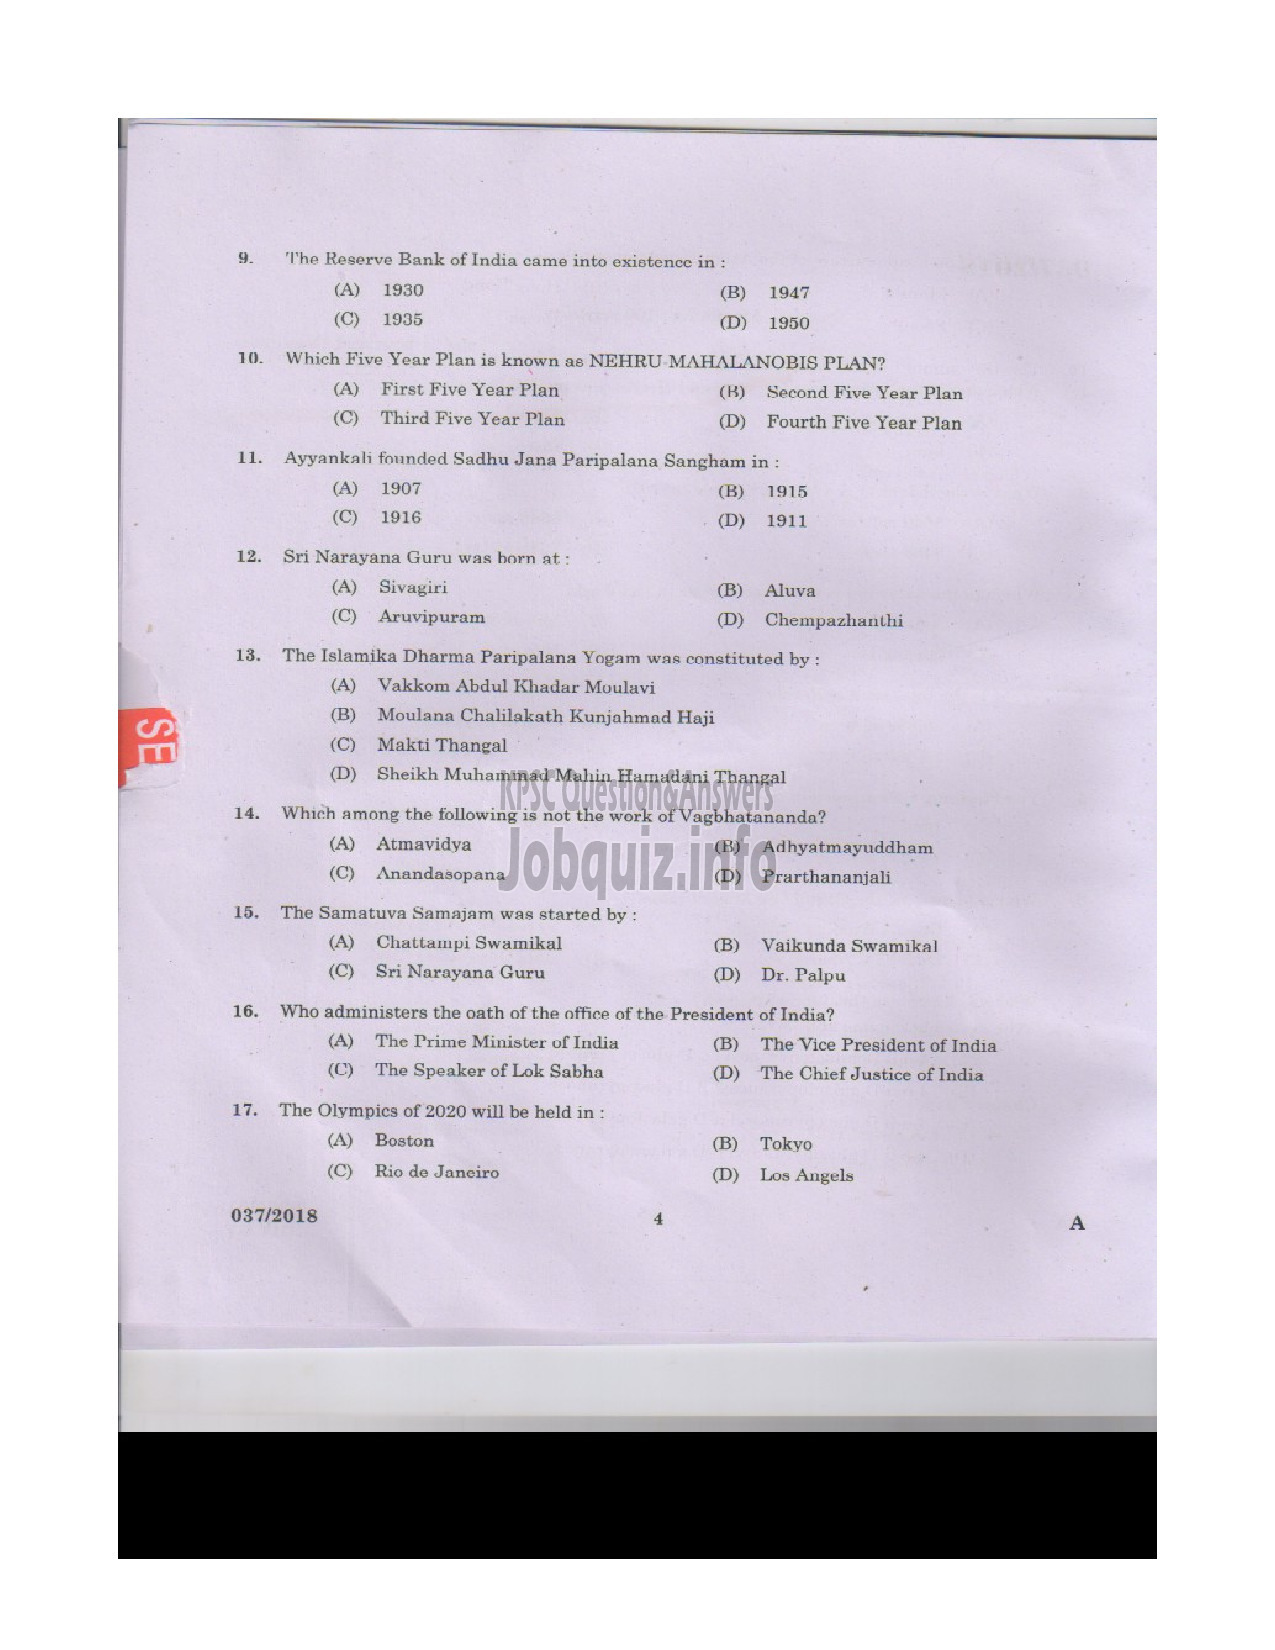 Kerala PSC Question Paper - VOCATIONAL INSTRUCTOR IN DAIRYING MILK PRODUCTS VHSE-3